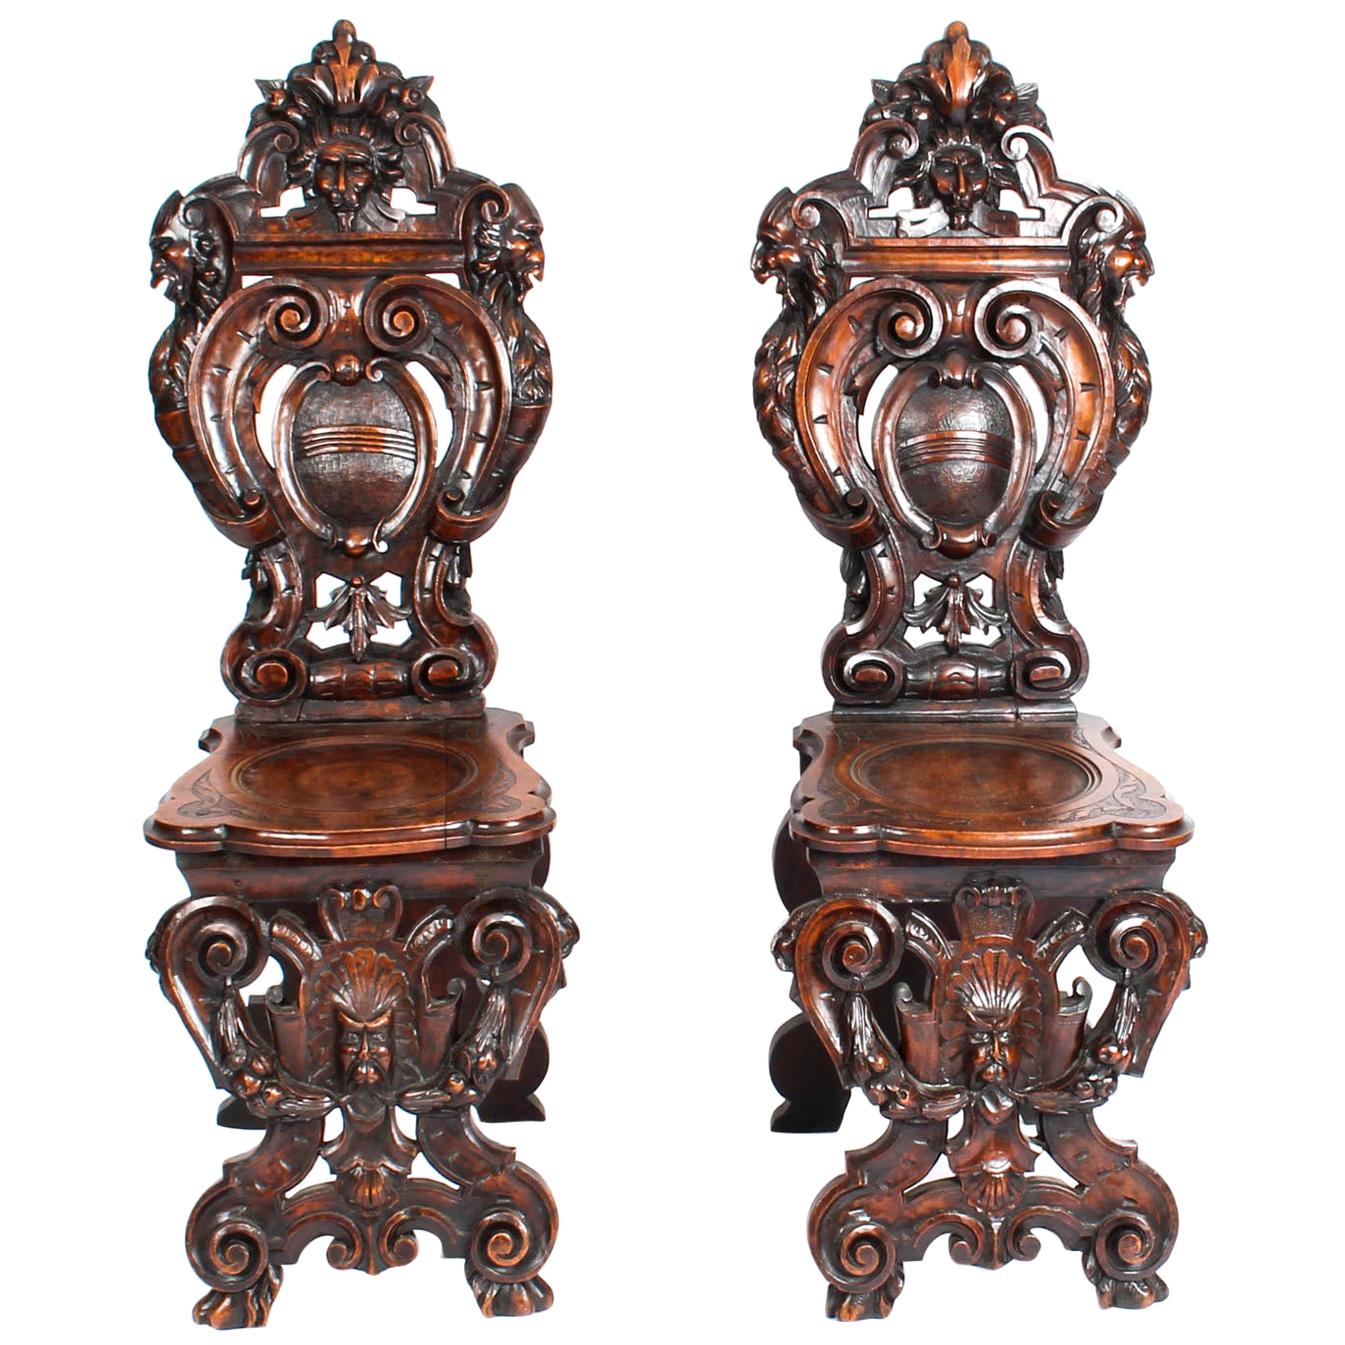 Antique Pair Carved Italian Walnut Sgabello Hall Chairs 19th C